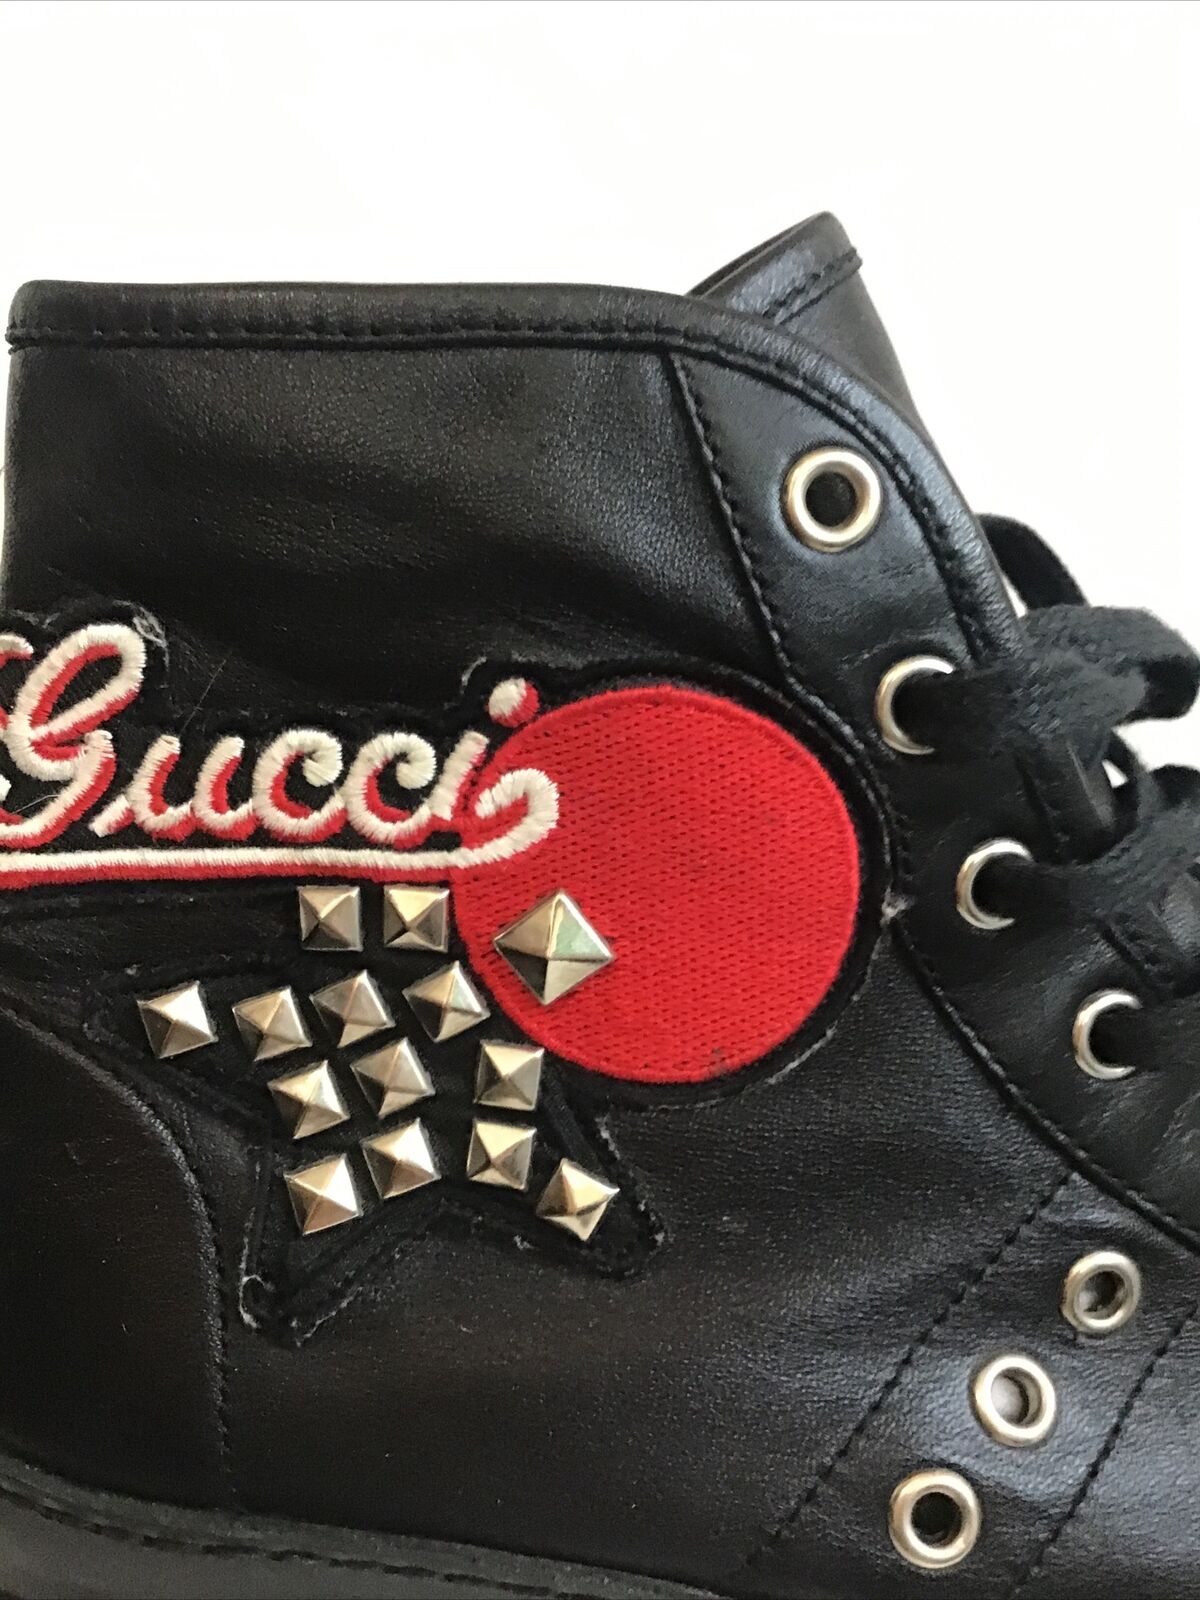 Gucci Sneaker Black Leather Lace Up High Top Stud Embroider Logo Side Size  W10